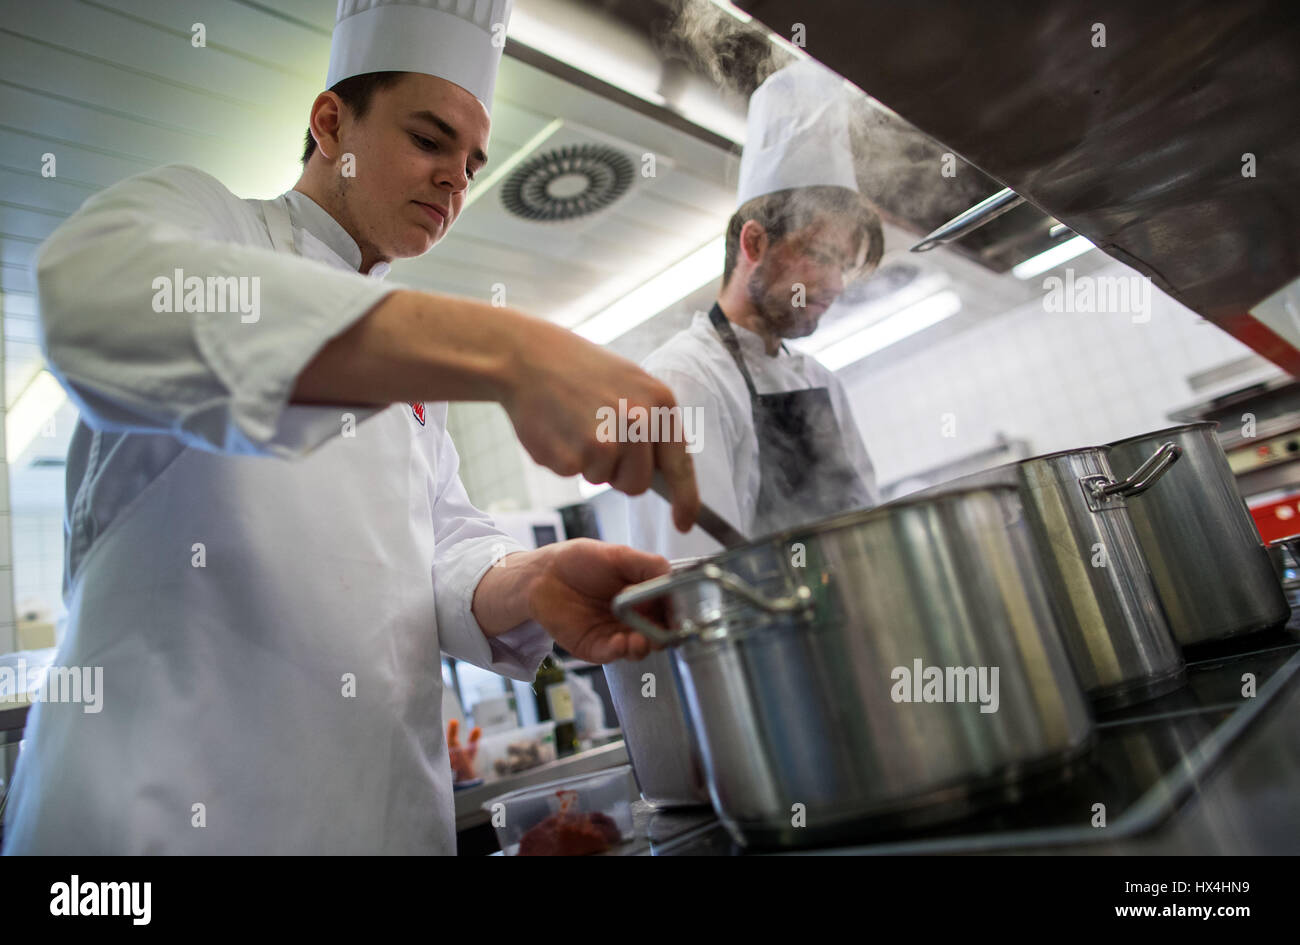 Stralsund, Germany. 21st Mar, 2017. Trainee cooks Johannes Volckmann (L) and Lorenz Maash (R) at the stove during a competition for up and coming chefs in German state of Mecklenburg-Western Pomerania, in Stralsund, Germany, 21 March 2017. In total 27 trainees from the three local Chamber of Commerce districts qualified for the competition. Photo: Jens Büttner/dpa-Zentralbild/dpa/Alamy Live News Stock Photo